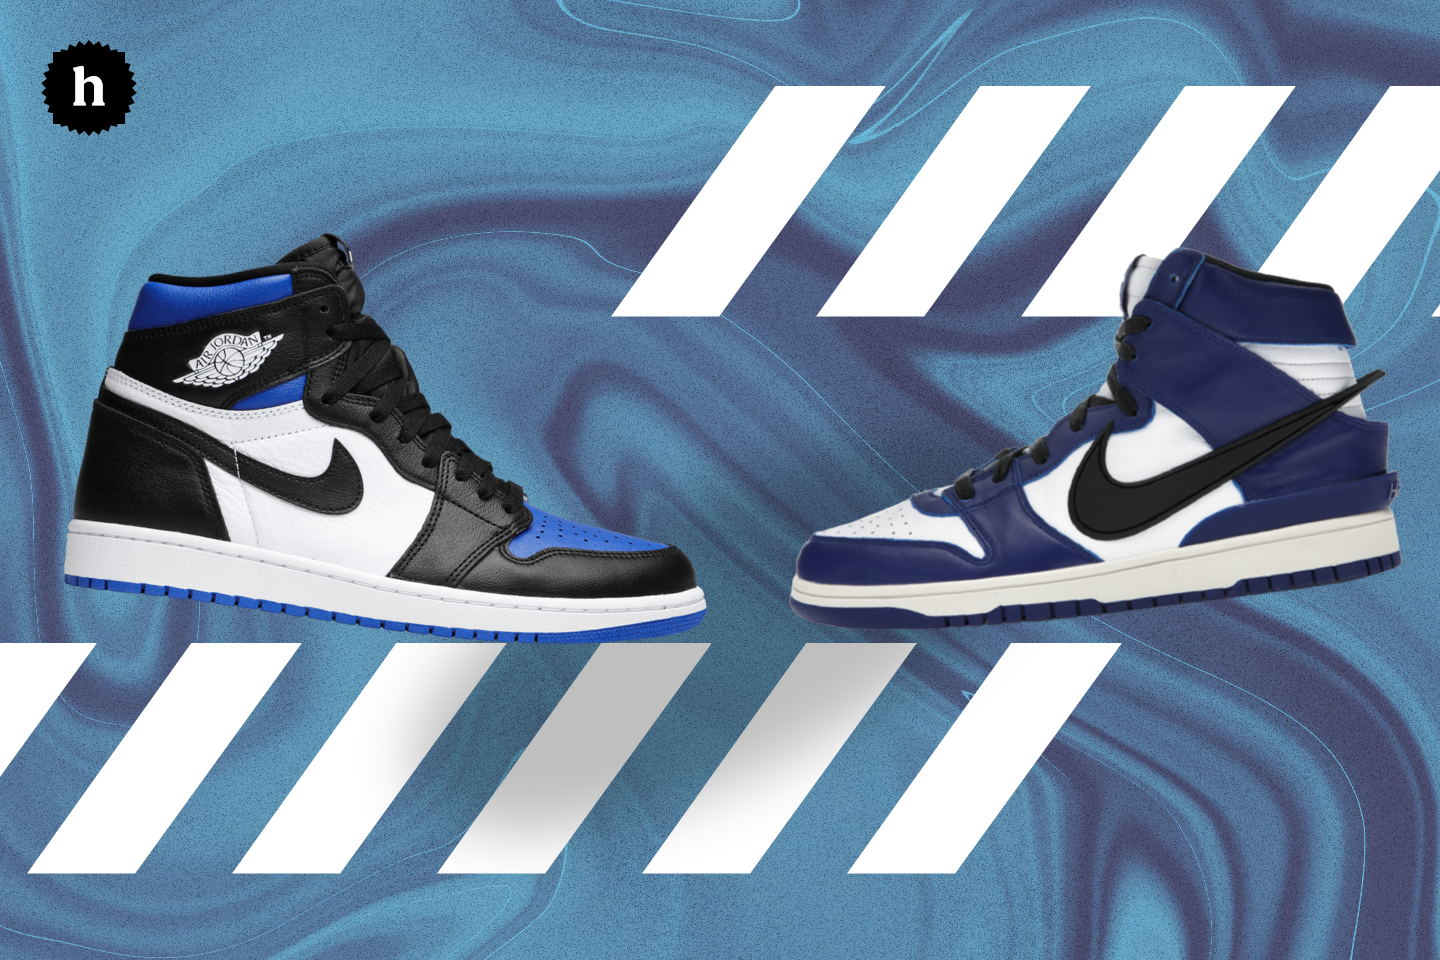 difference between dunks and jordan 1